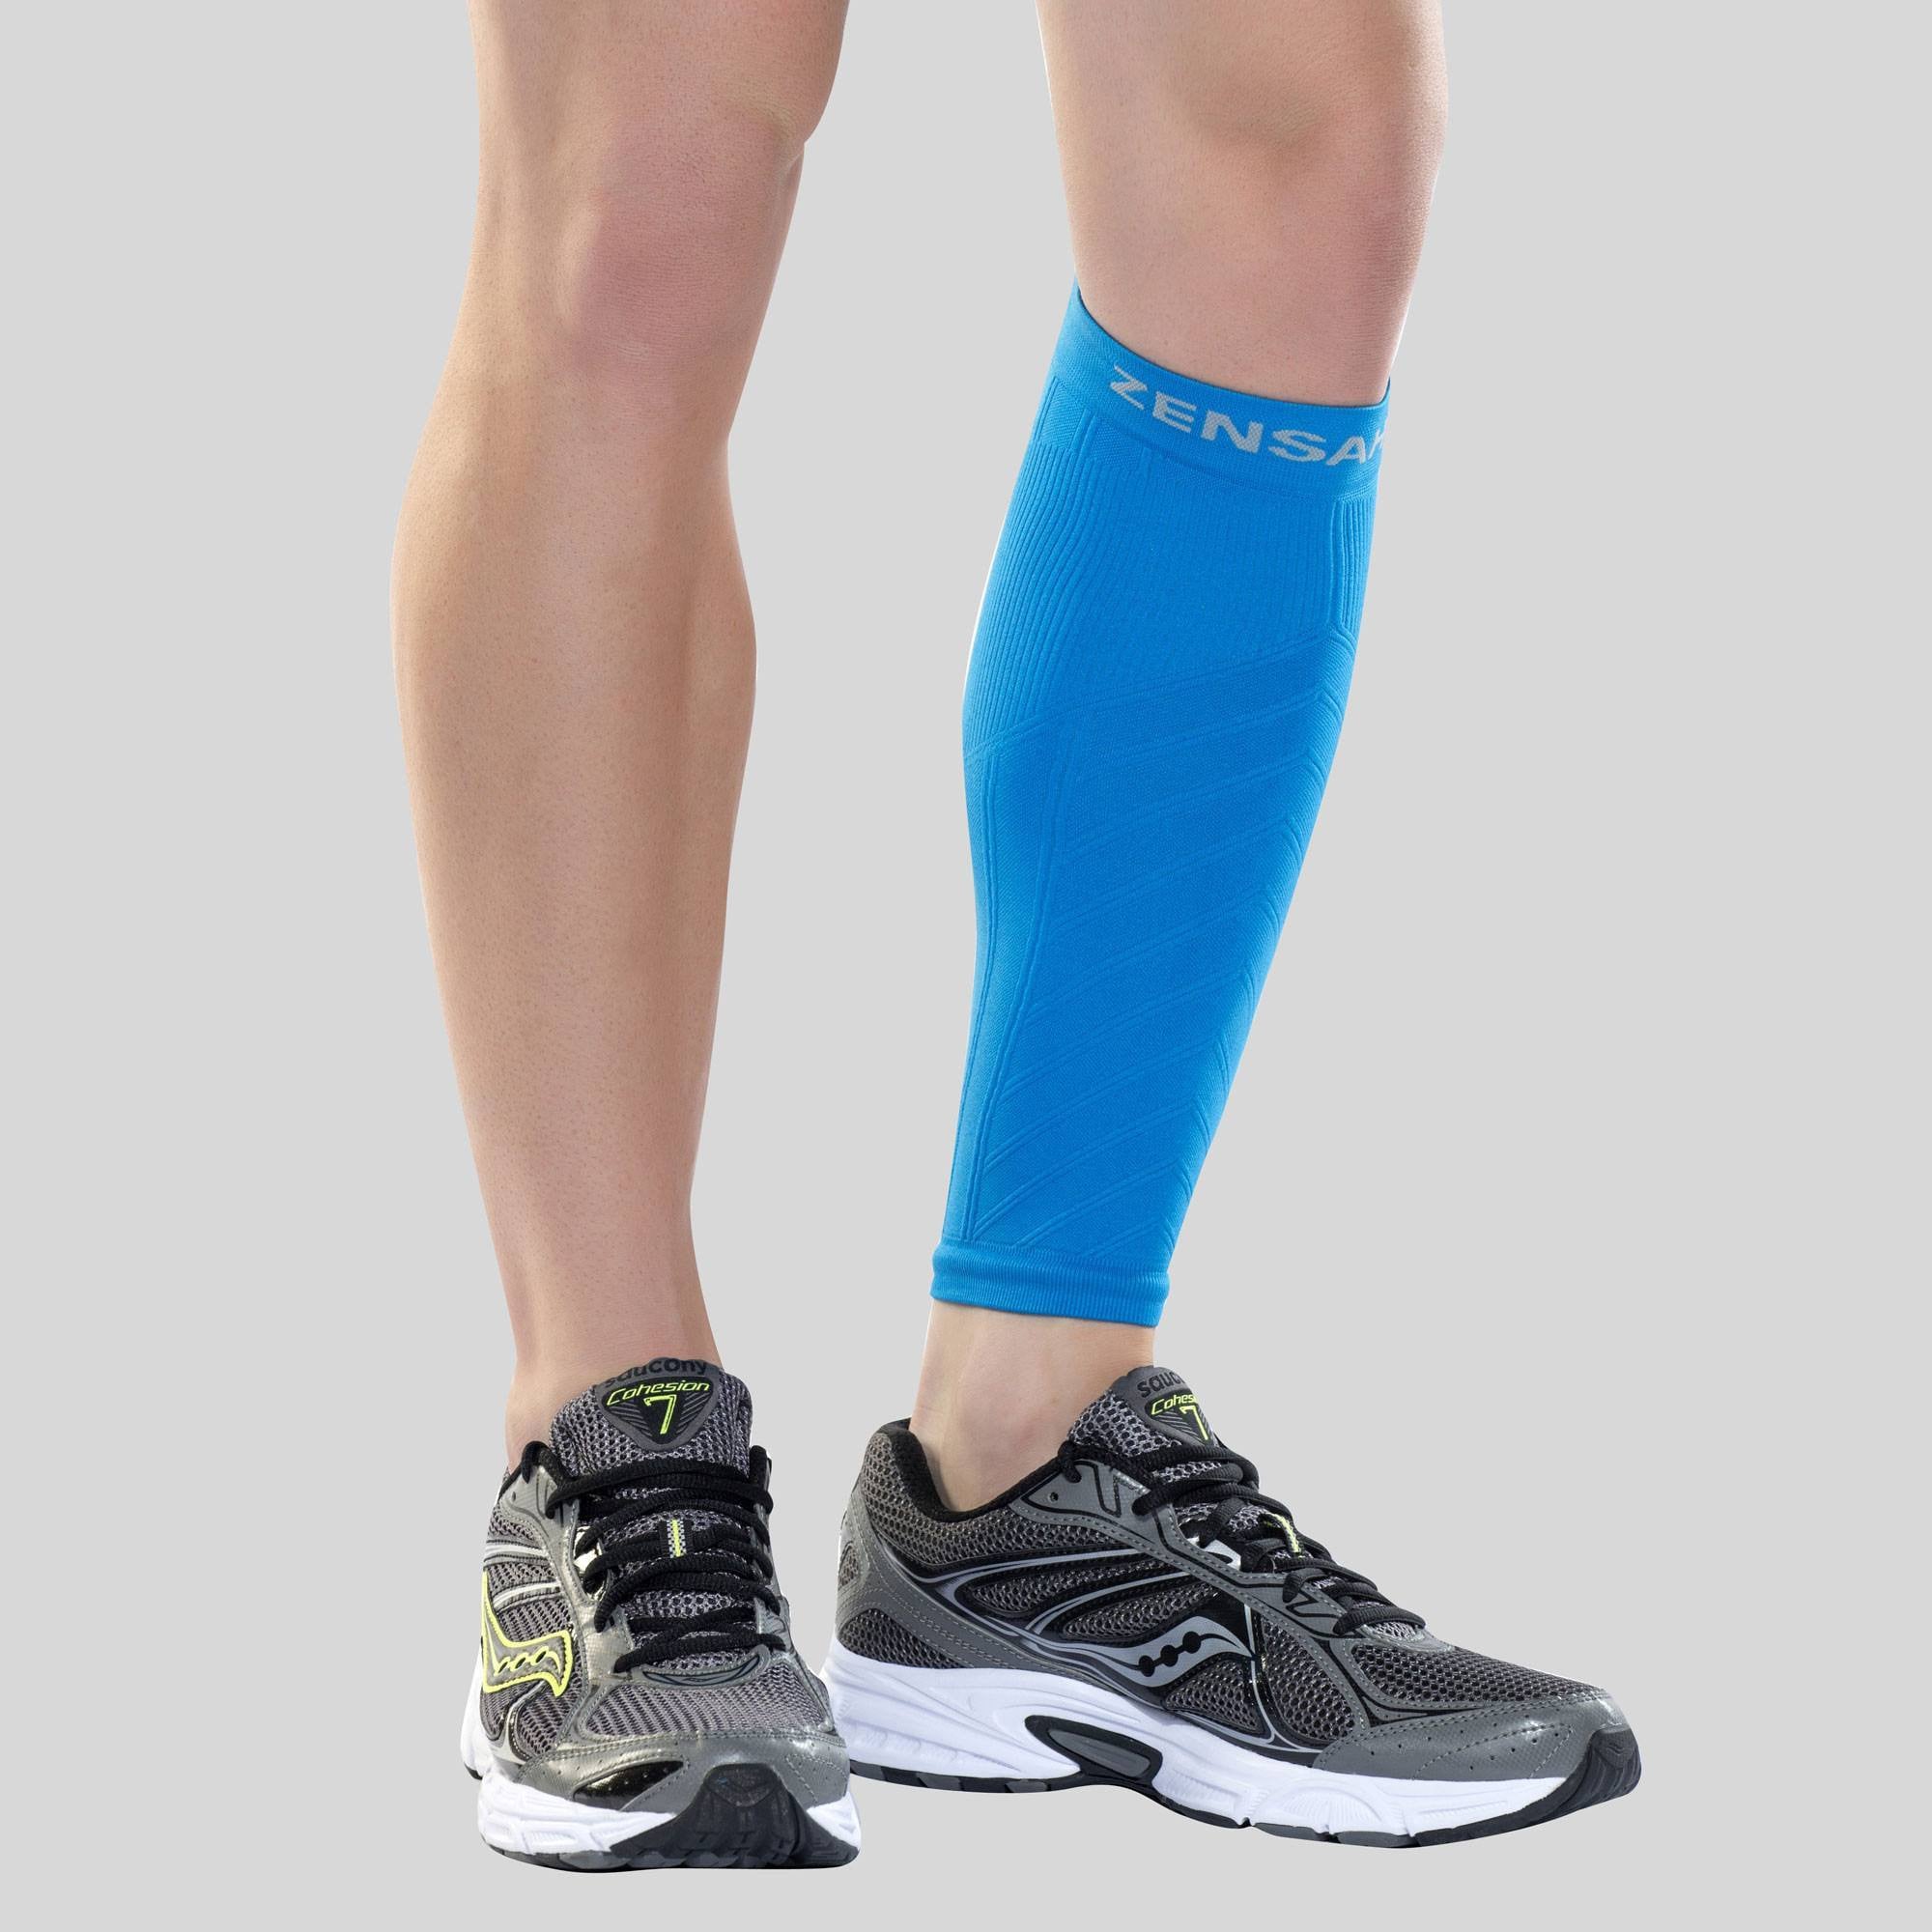 Generic Calf Compression Sleeves, Shin Splint And Calf Support